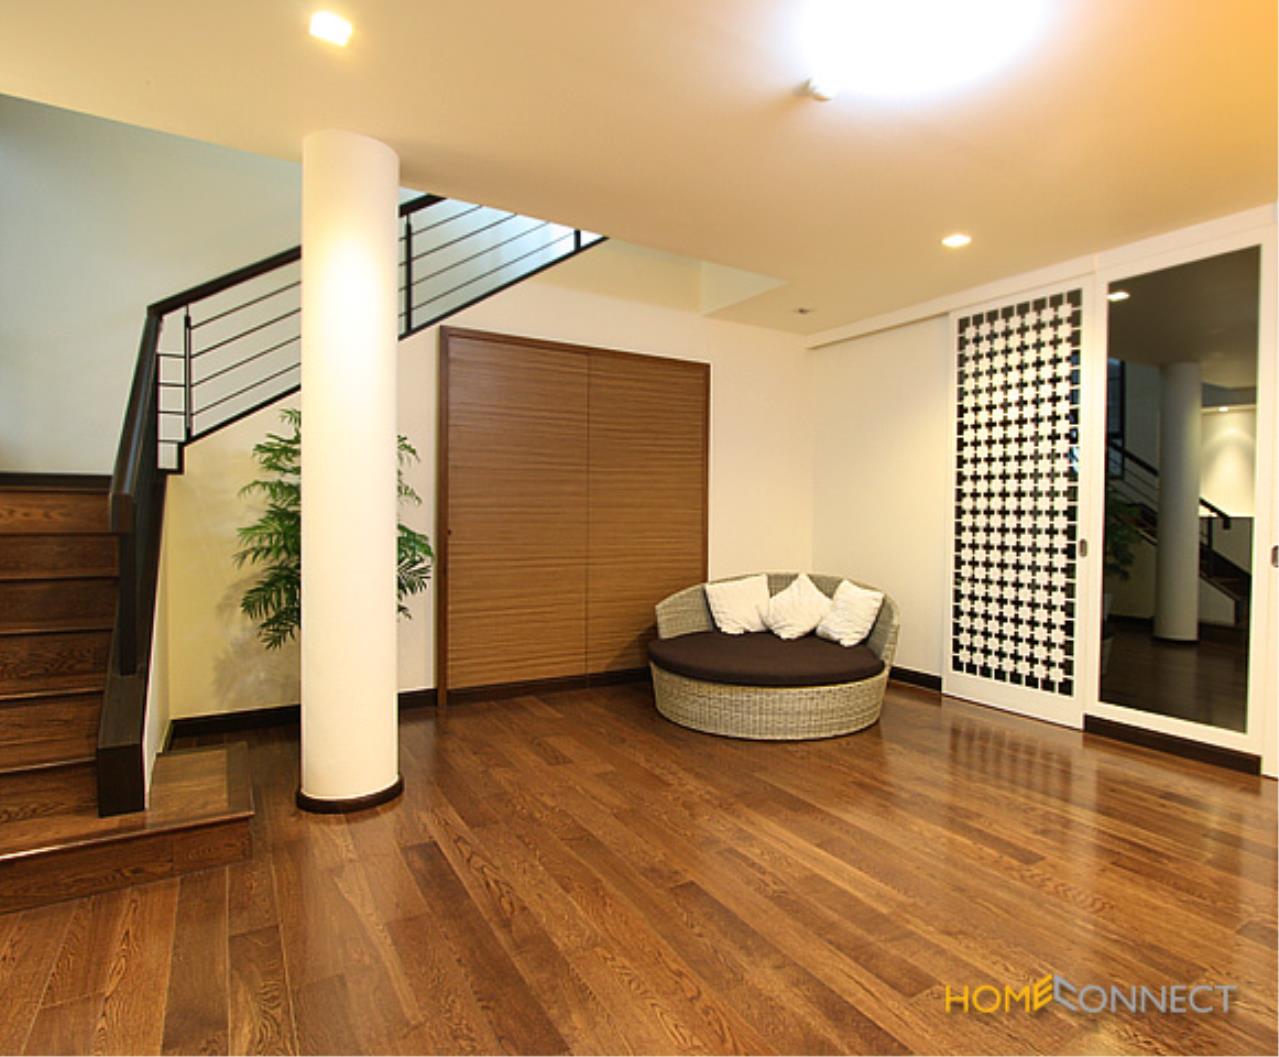 Home Connect Thailand Agency's House in Compound for Rent in Ekamai area 18